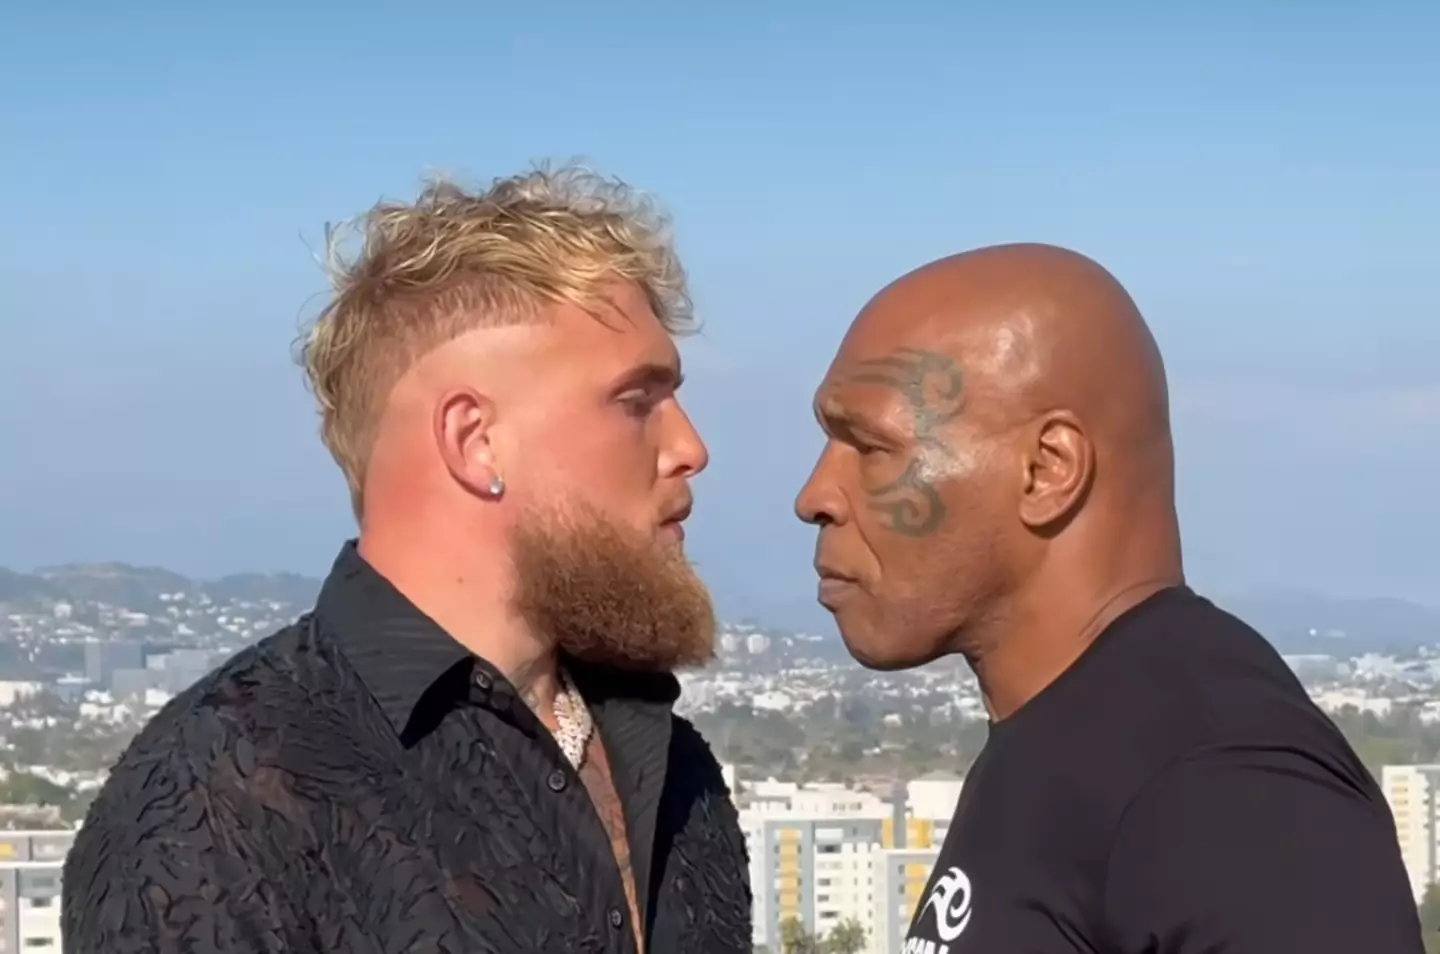 Mike Tyson is soon set to face Jake Paul in the boxing ring. (Instagram/@jakepaul)